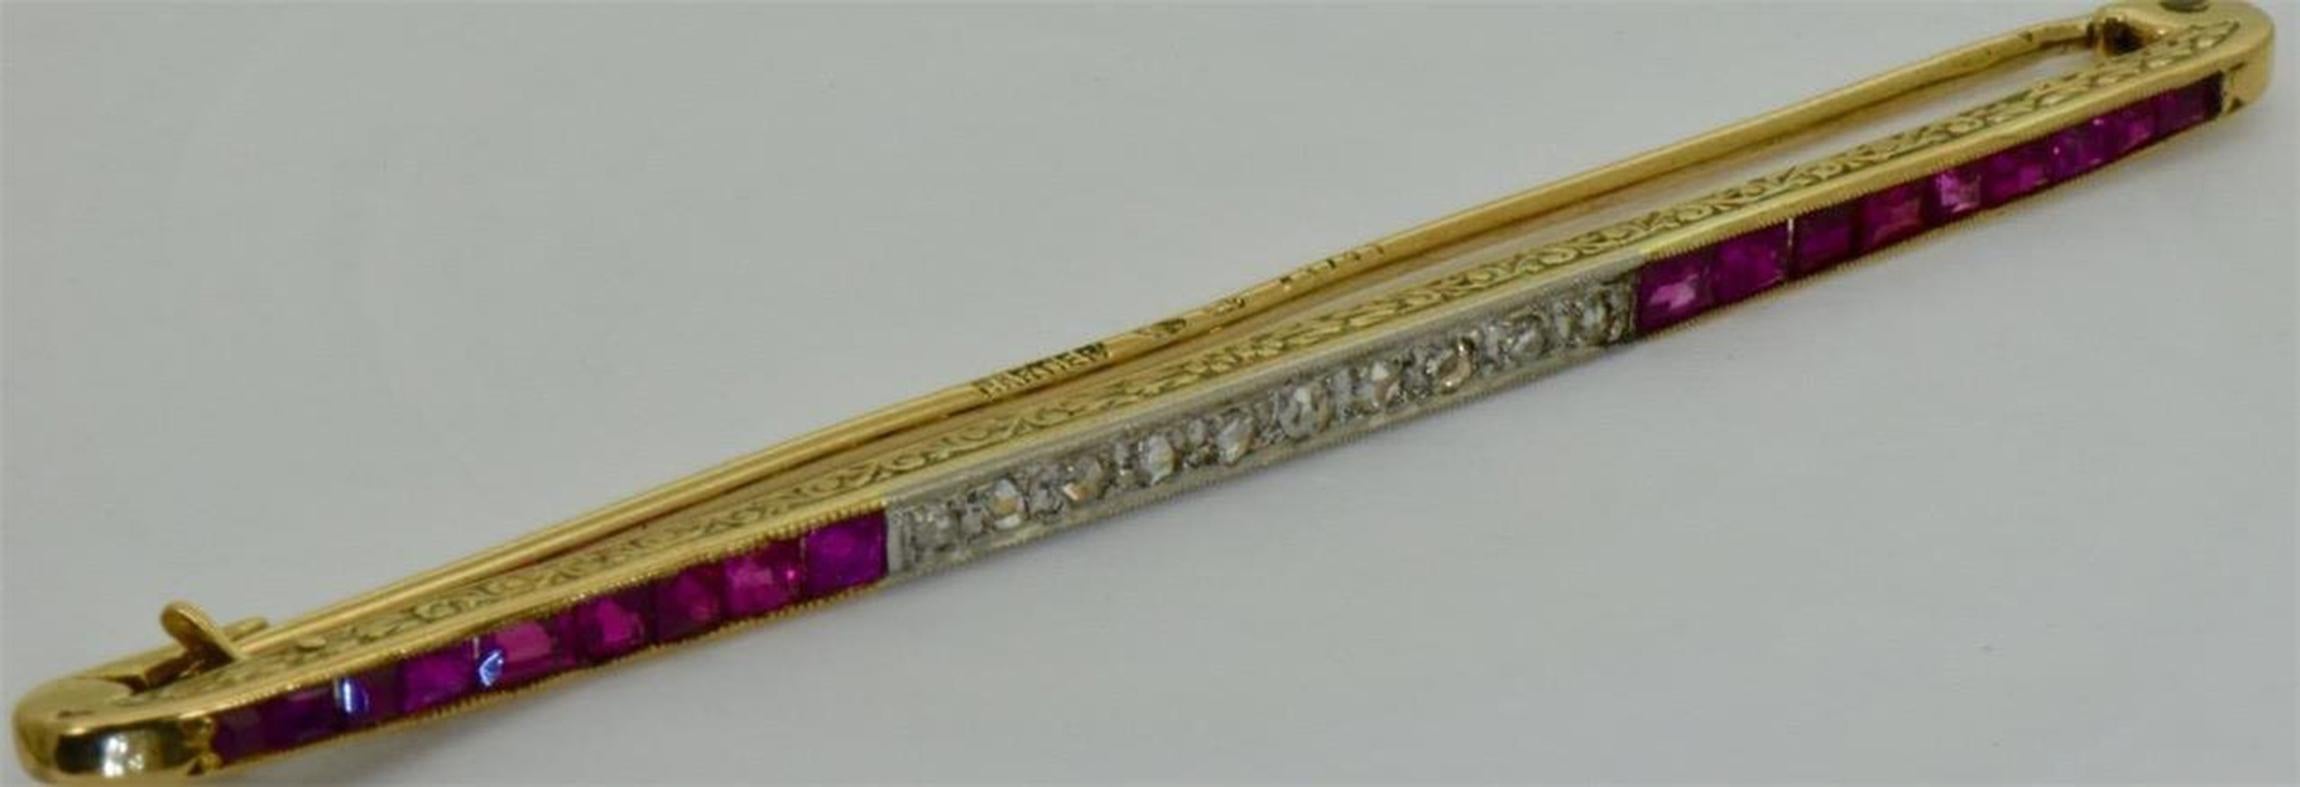 Art Nouveau Antique French Cartier Diamond and Rubies Gold Brooch, 1920s For Sale